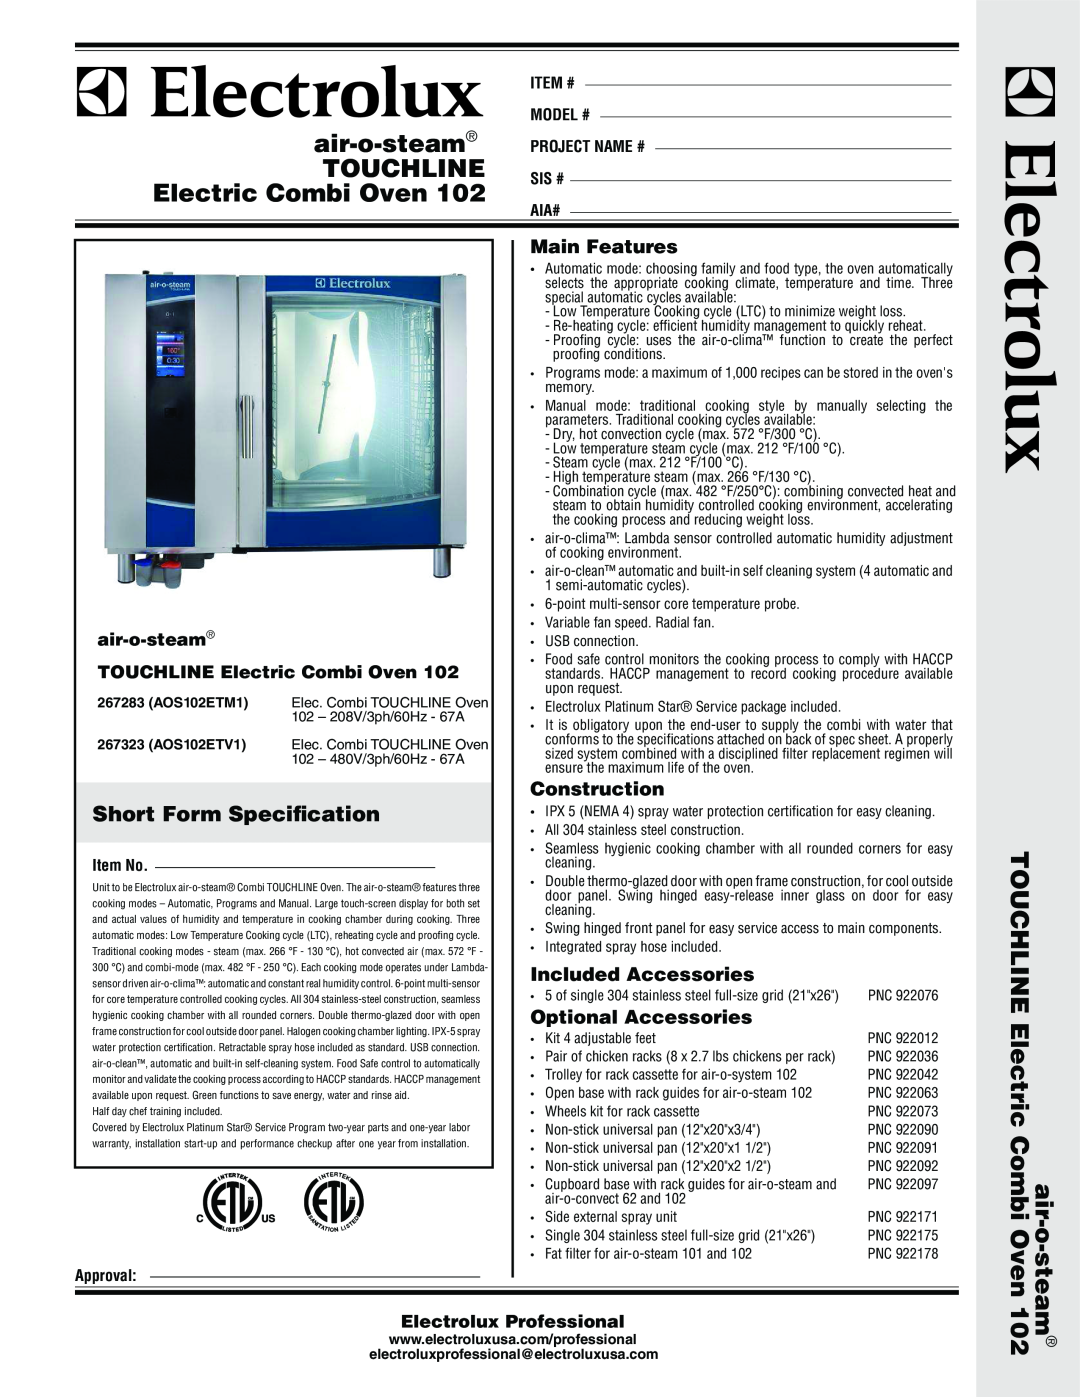 Electrolux AOS102ETM1, AOS102ETV1 warranty Short Form Speciﬁcation, air-o-steam, TOUCHLINE Electric Combi Oven, Touchline 